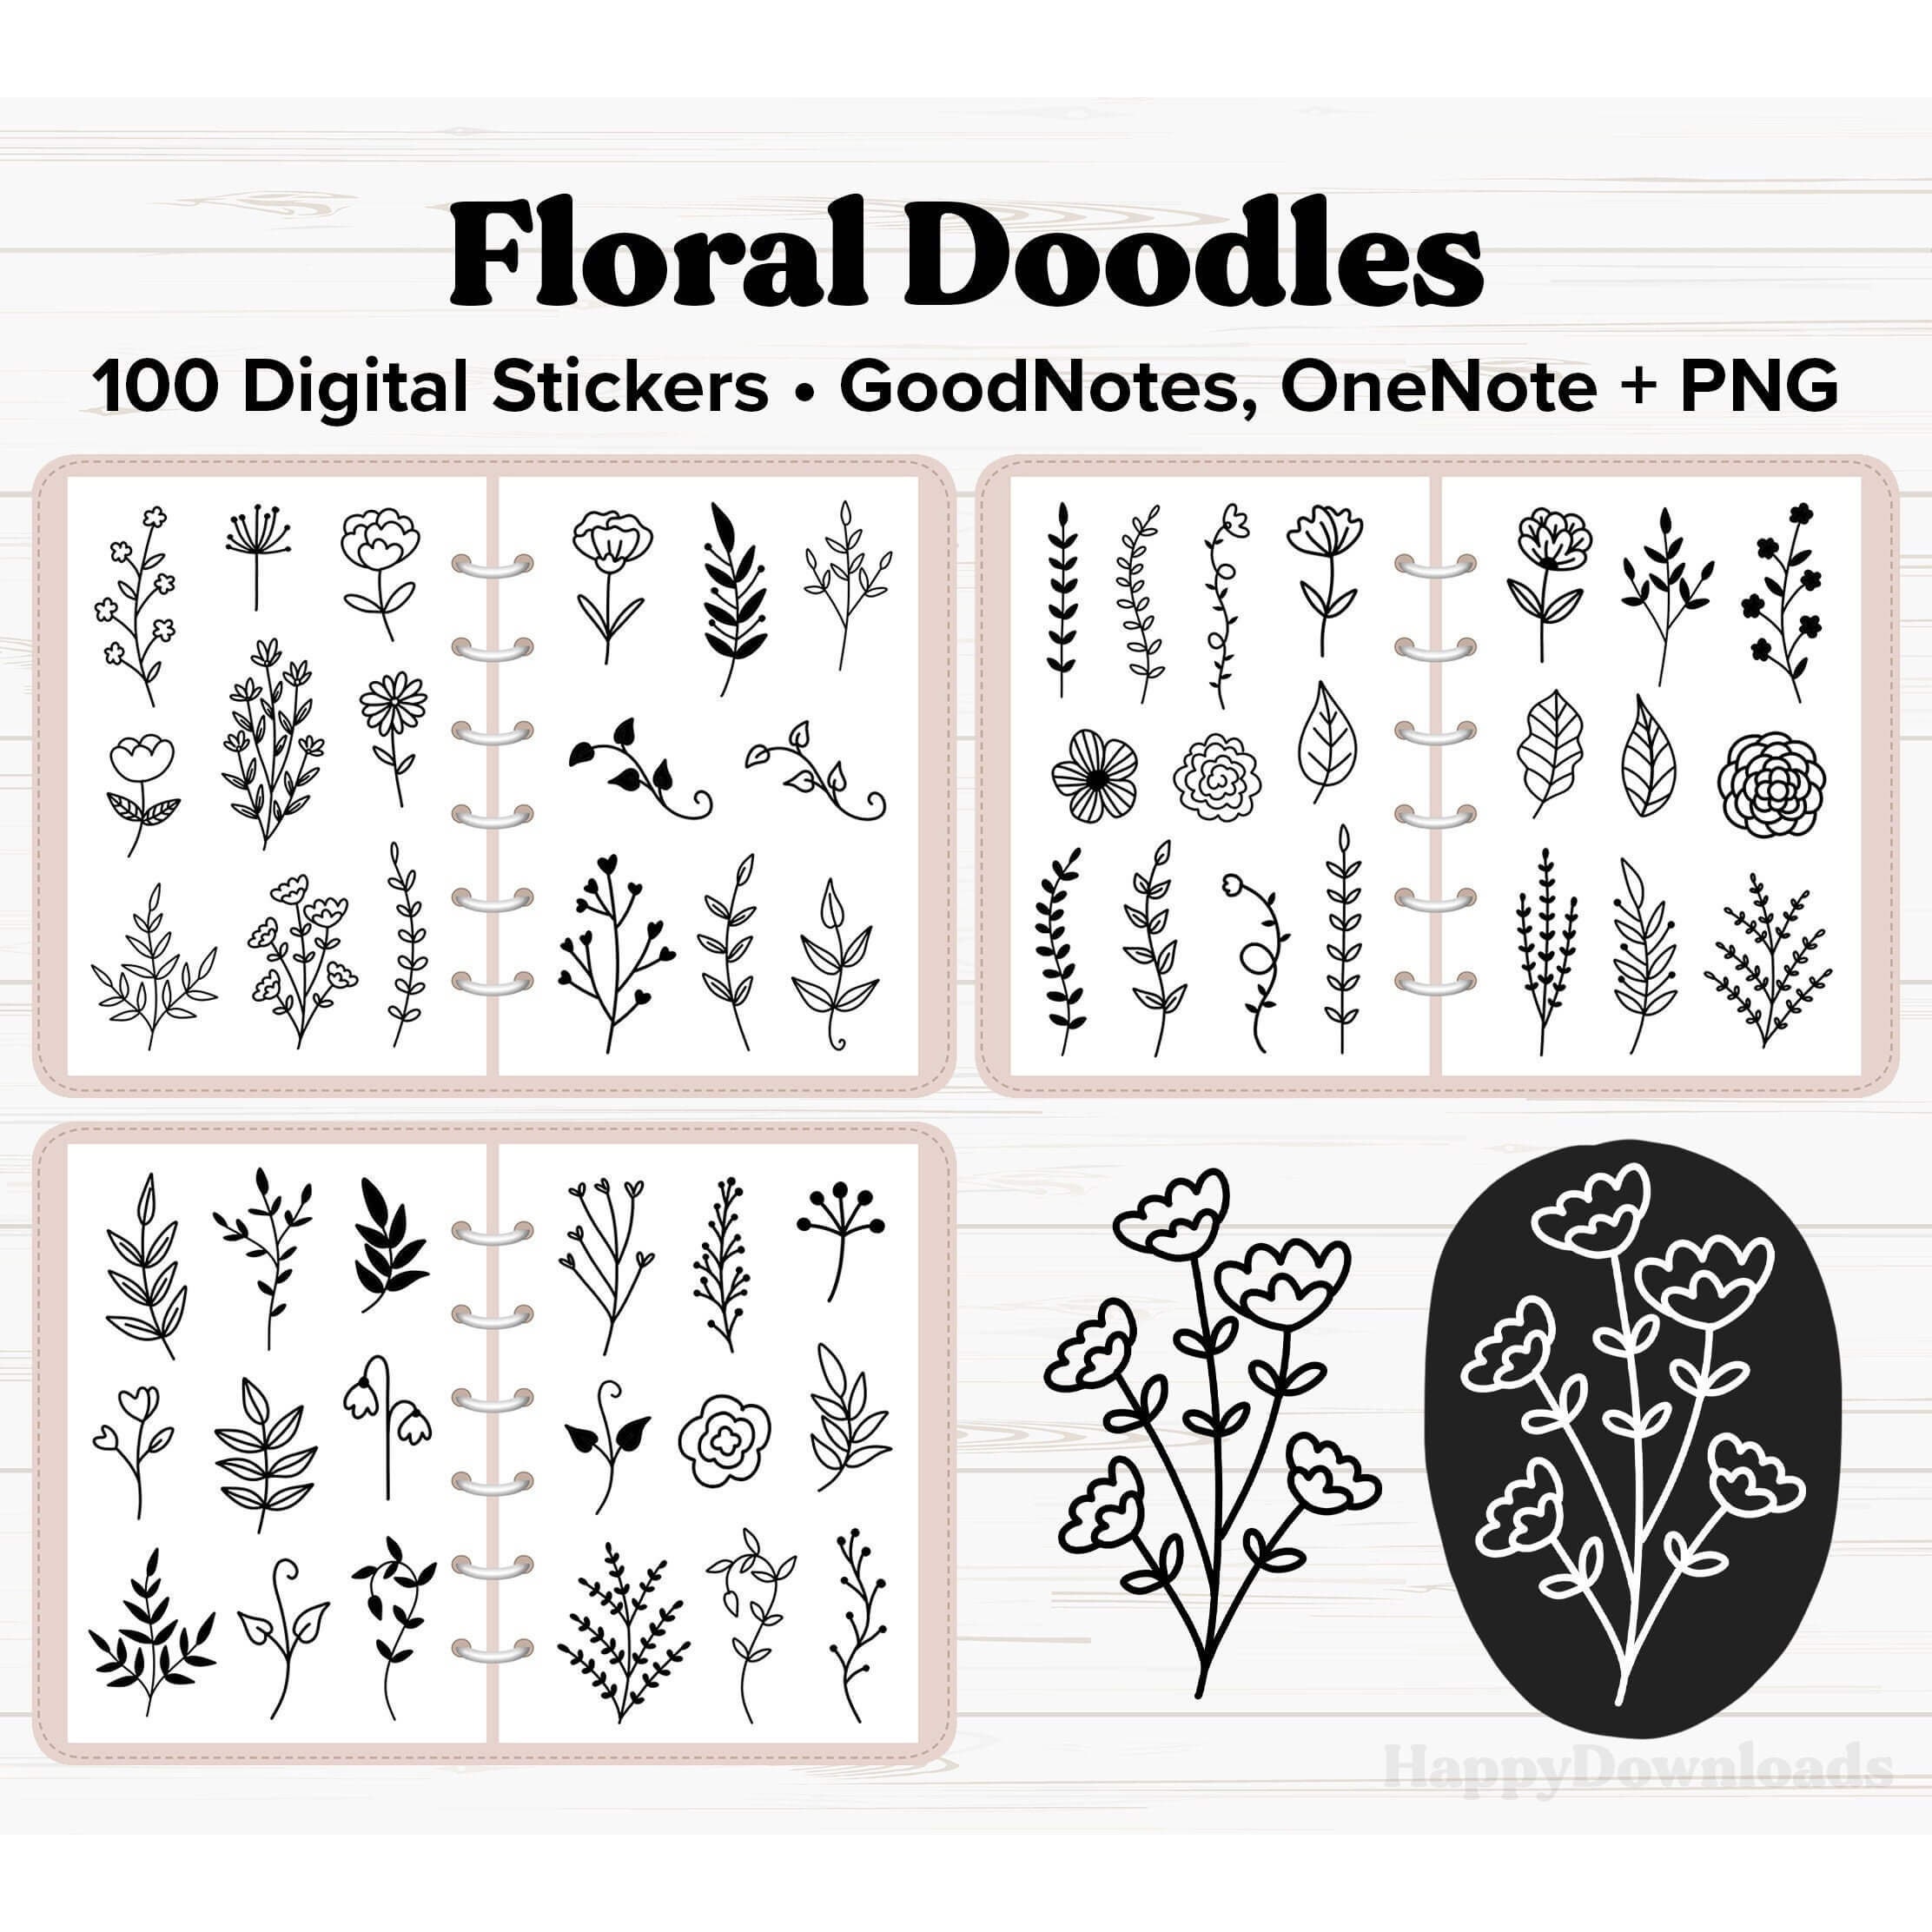 Flower Stickers PNG, Printable Flower Stickers, Floral Printable Stickers,  Flowers Png, Cricut Print and Cut, Flower Sticker Sheet Png 